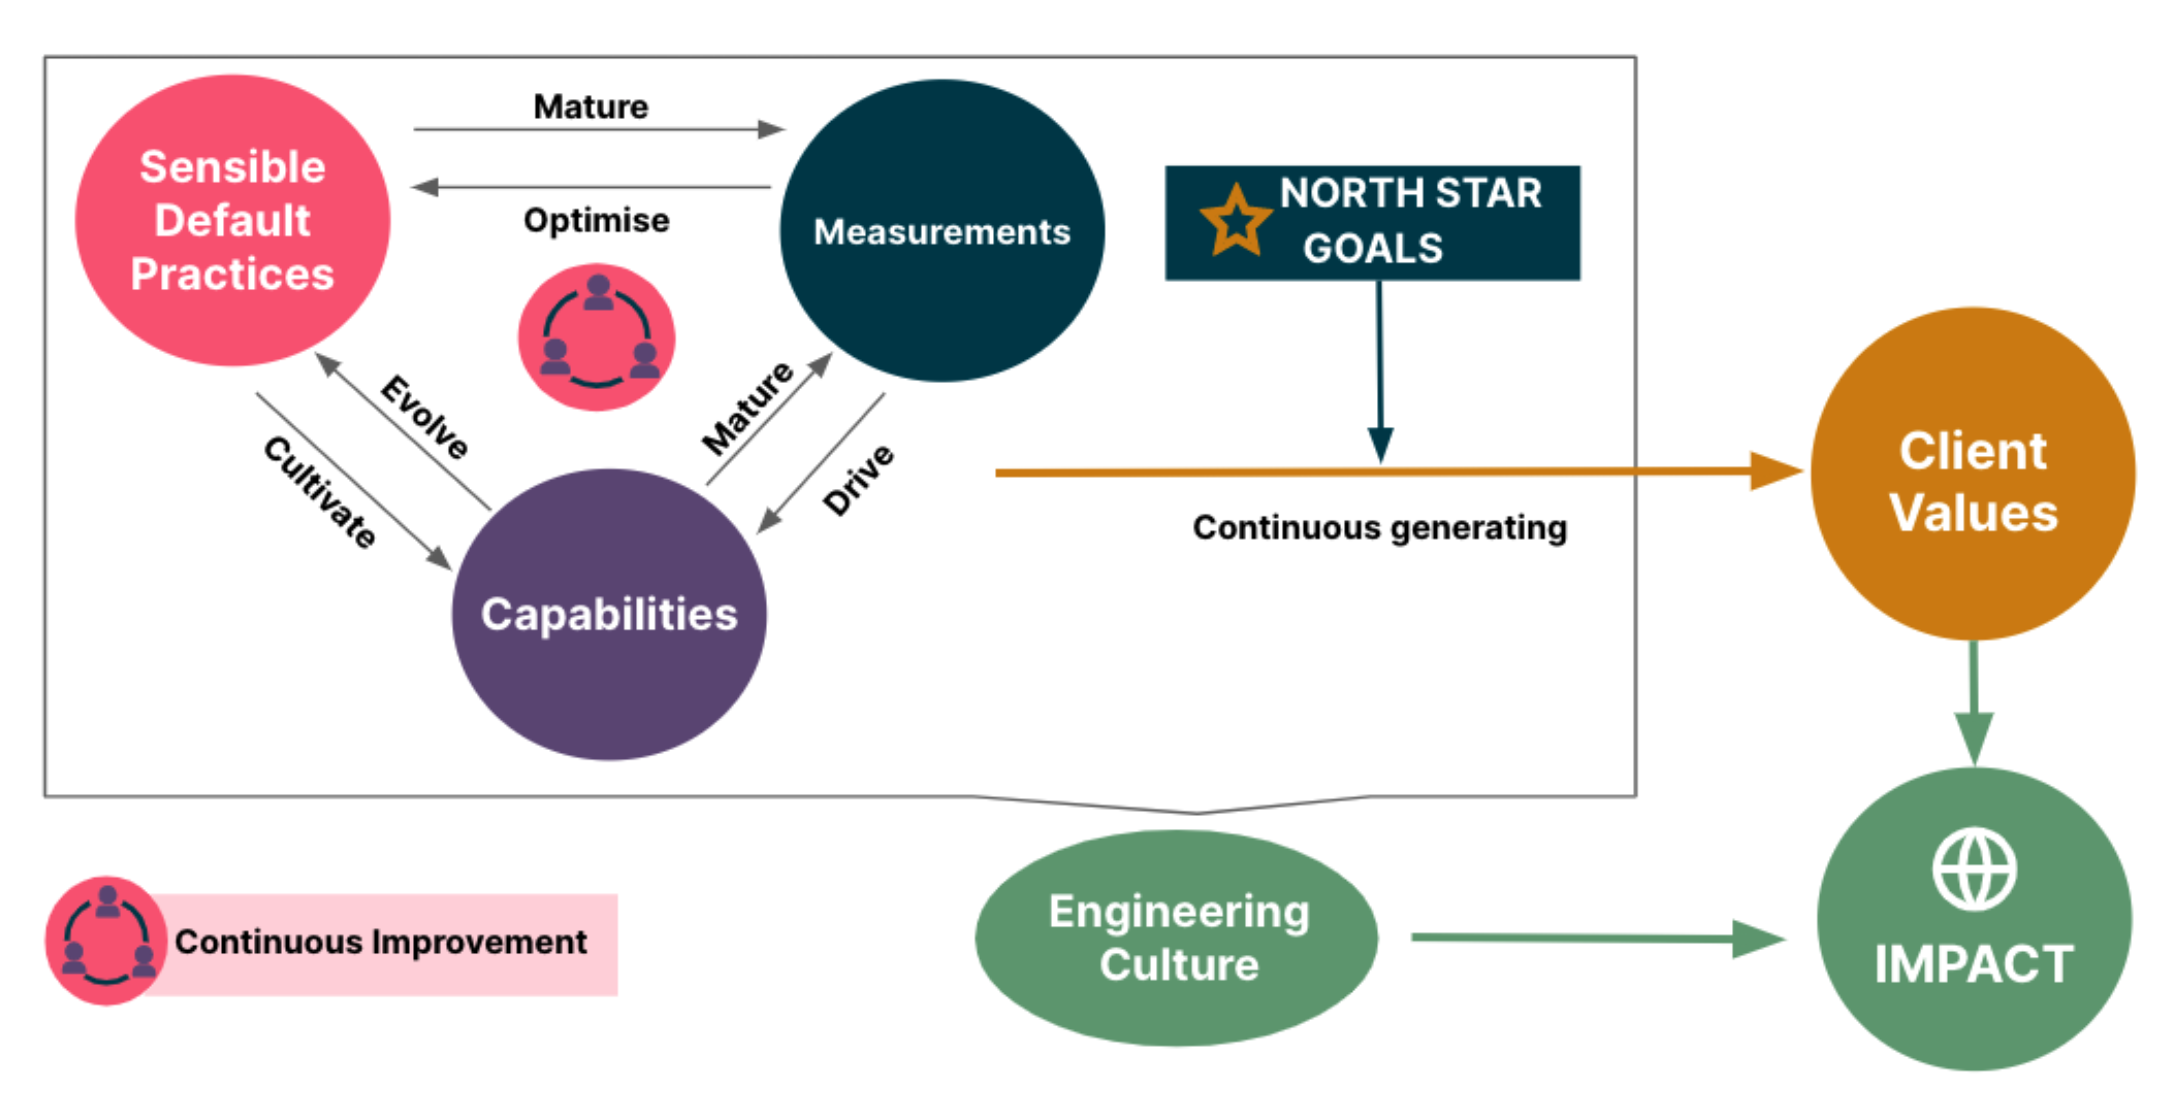 A framework to emphasize the value delivery via sensible default practices, measurements and capabilities following North Star goals, with the aim of creating impact and cultivating engineering culture.